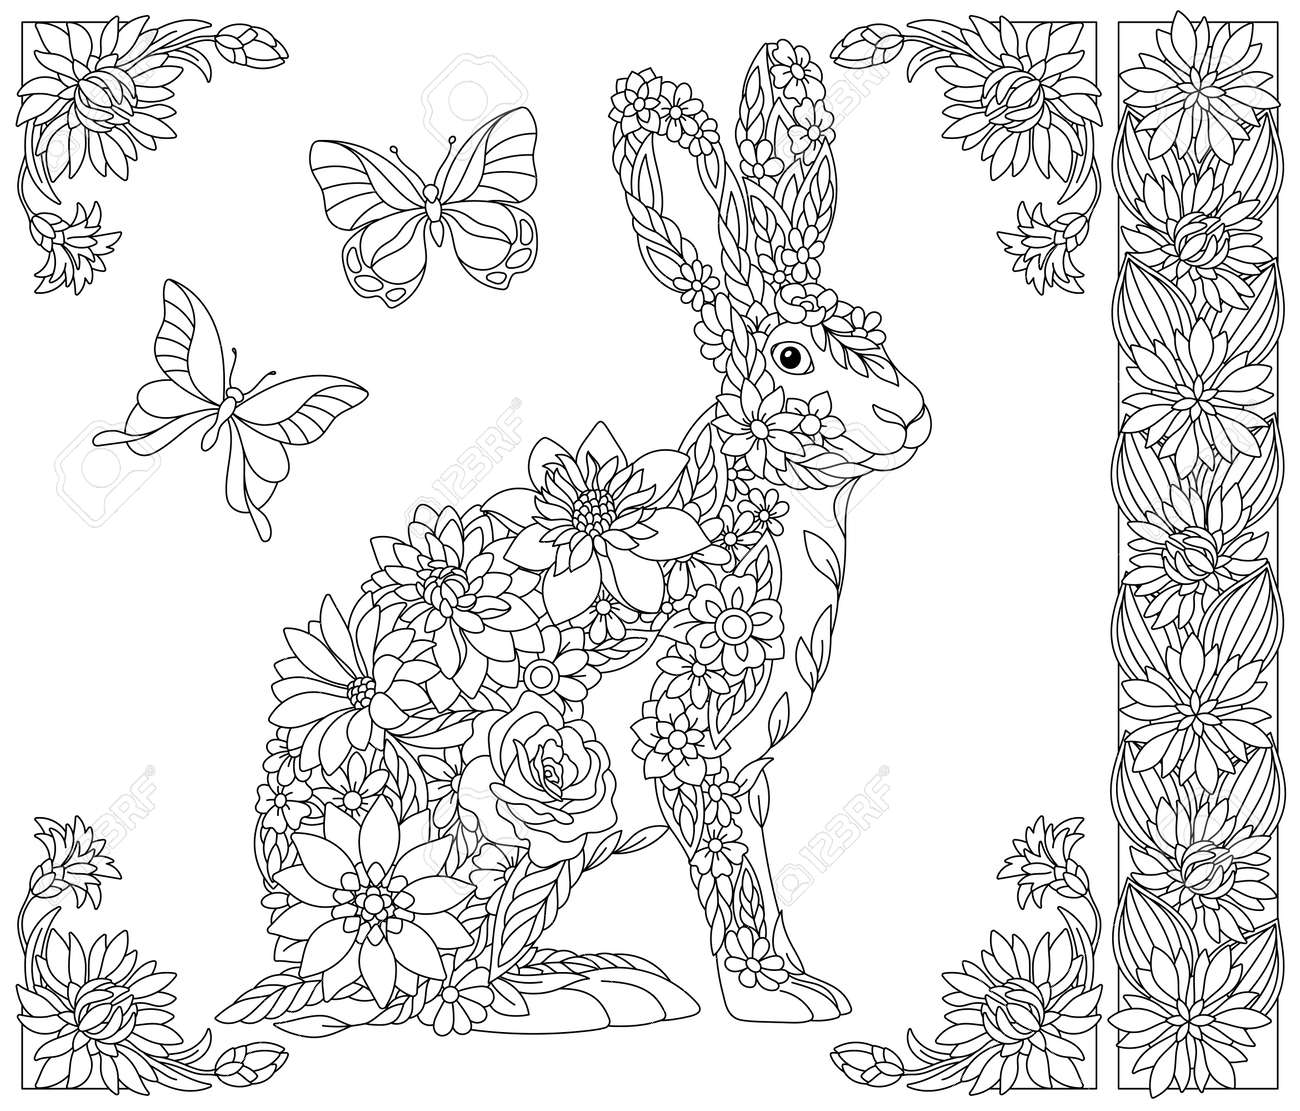 Adult coloring book page floral hare or rabbit ethereal animal consisting of flowers leaves and butterflies royalty free svg cliparts vectors and stock illustration image